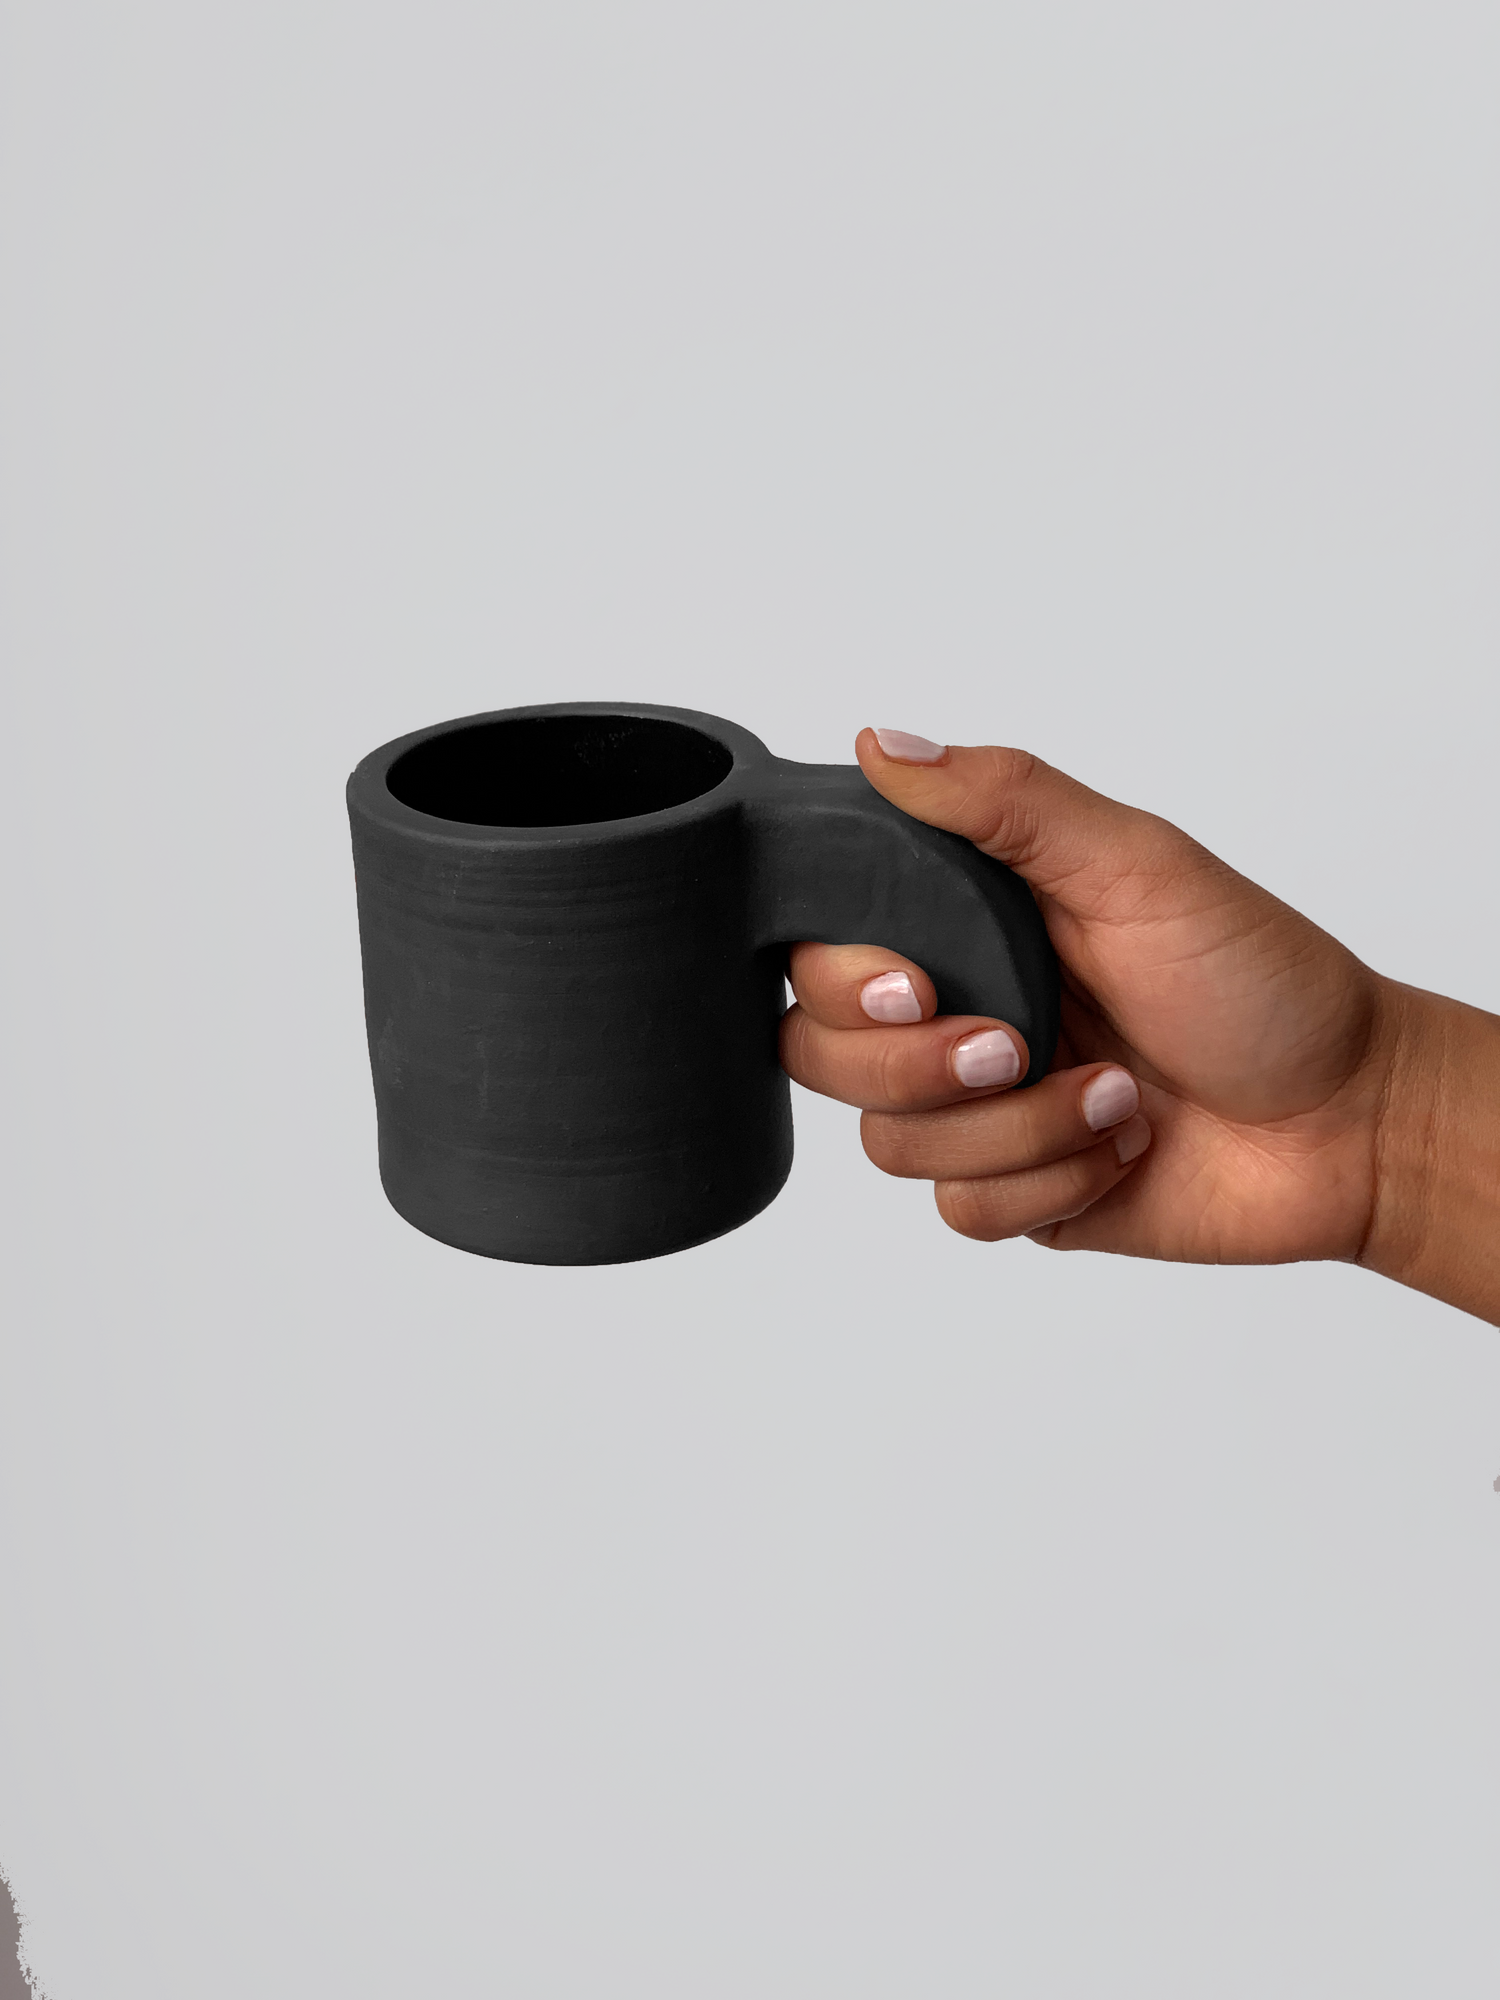 Black matte stoneware ceramic mug with a thick downward facing curved handle.